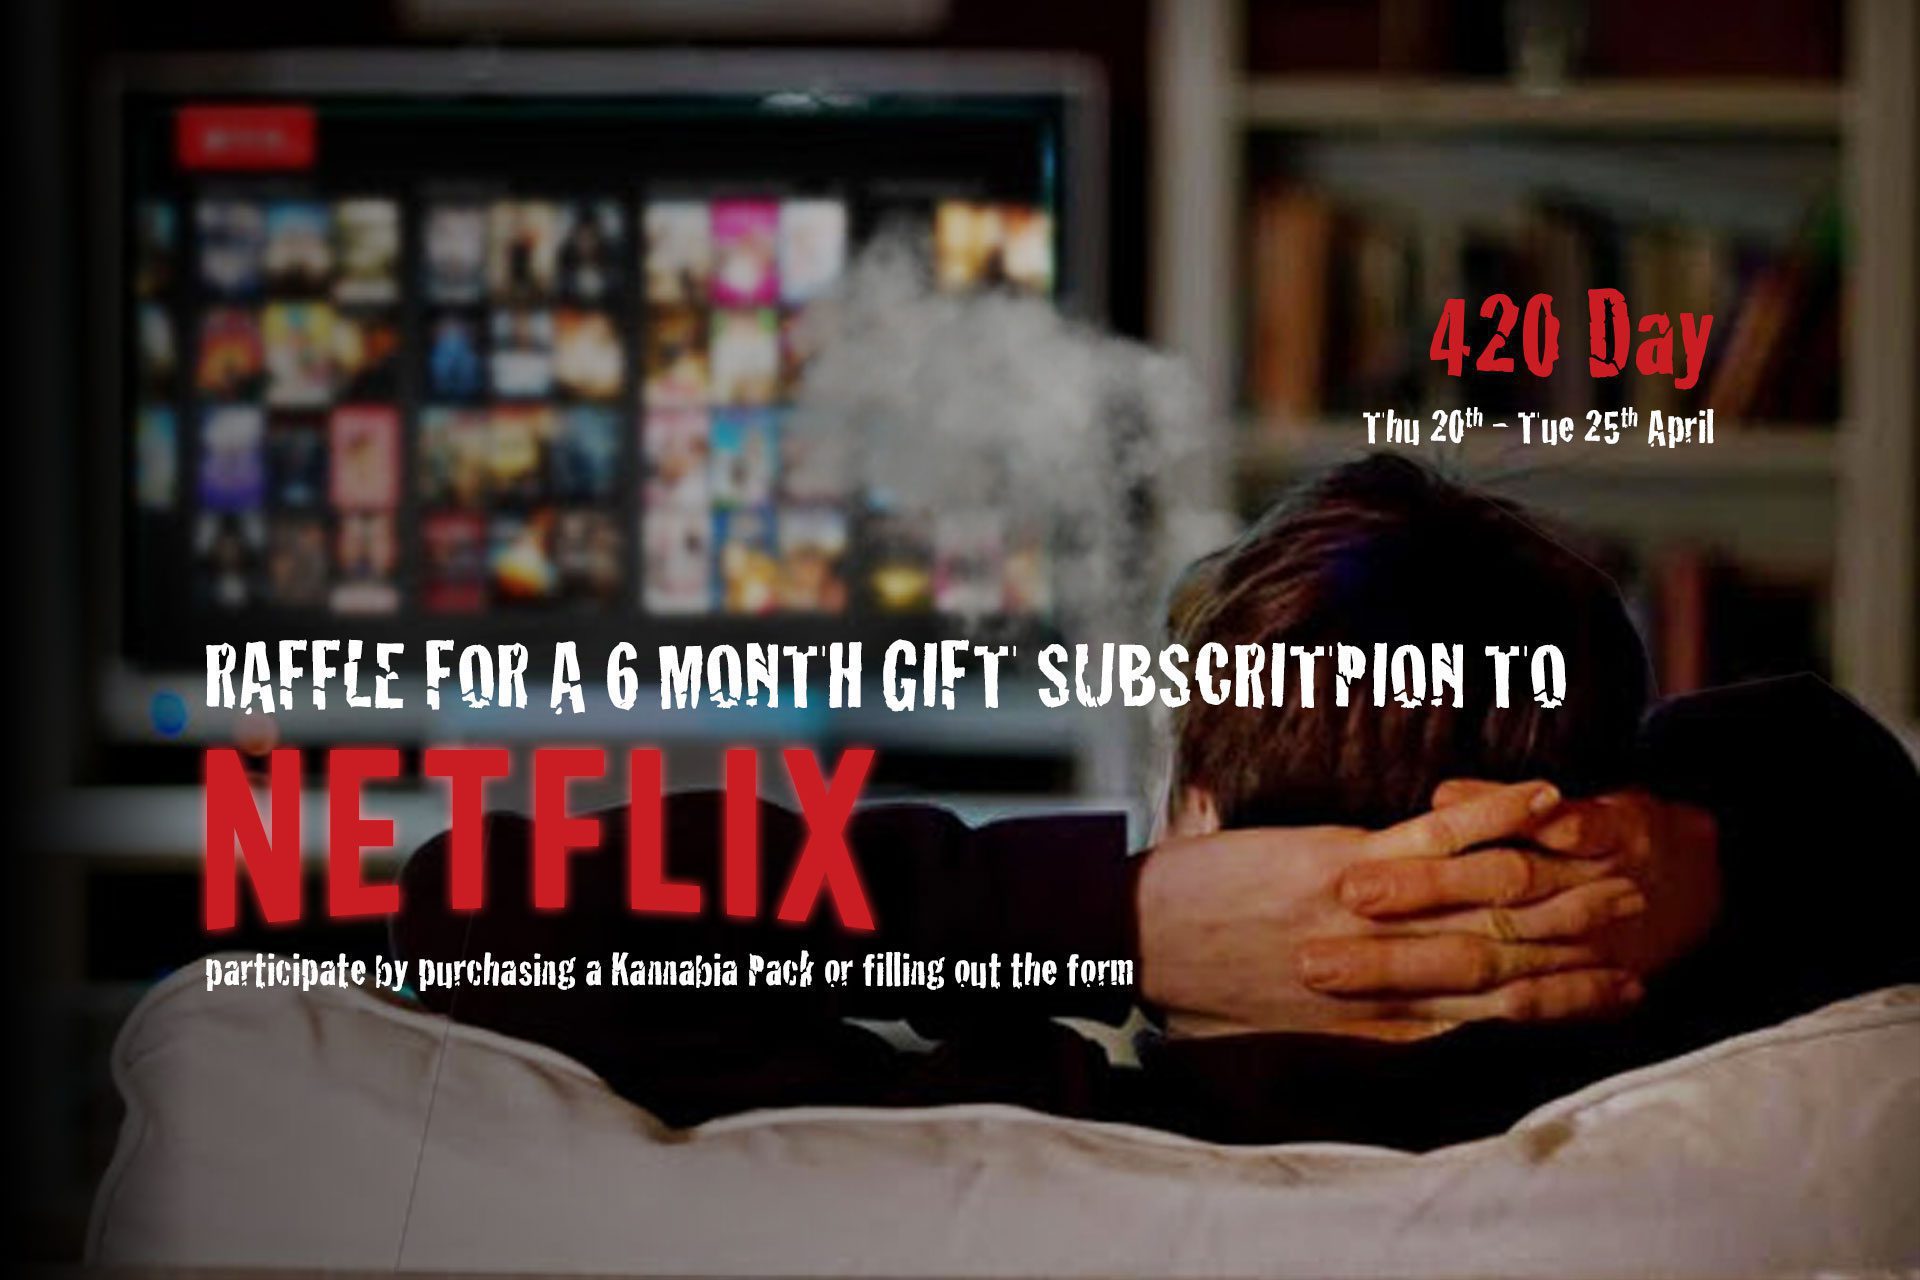 We are raffling a 6 months gift subscription to Netflix